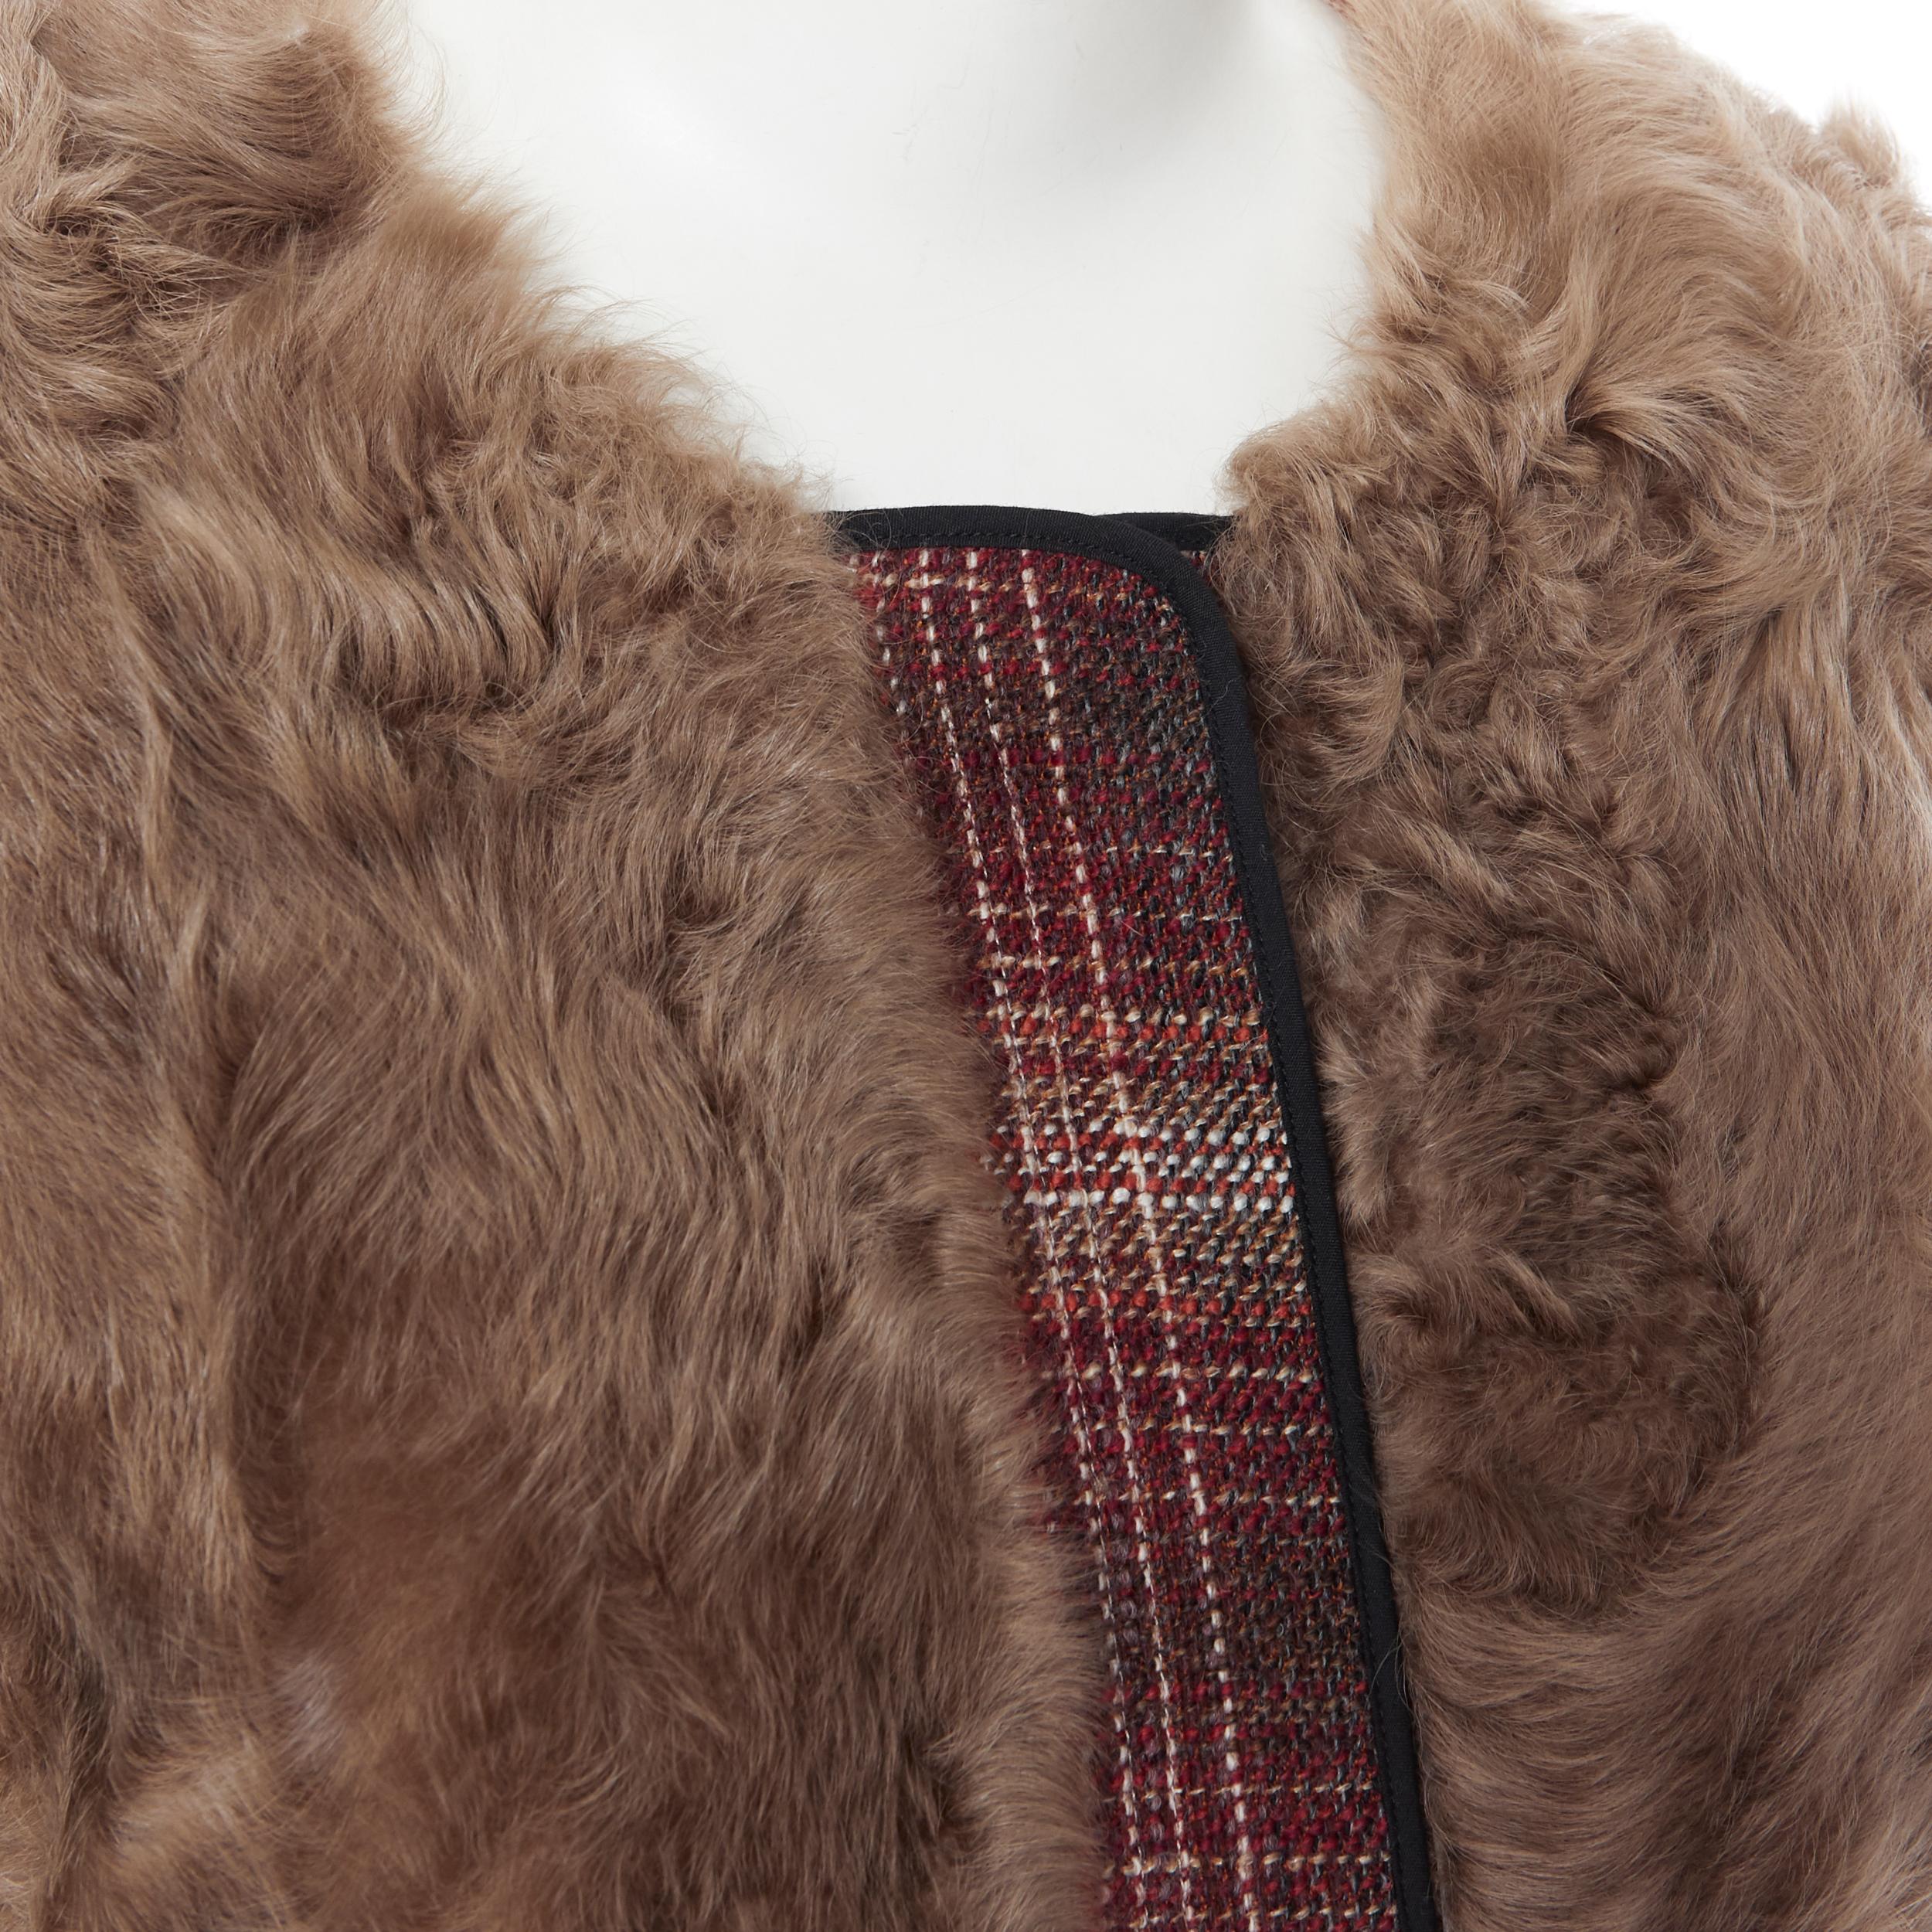 MARNI red checked wool tweed shearling fur panel colorblocked sleeve coat IT40
Brand: Marni
Model Name / Style: Tweed coat
Material: Wool
Color: Red, brown
Pattern: Check
Closure: Zip
Extra Detail: Genuine shearling fur front panel. Cut out at